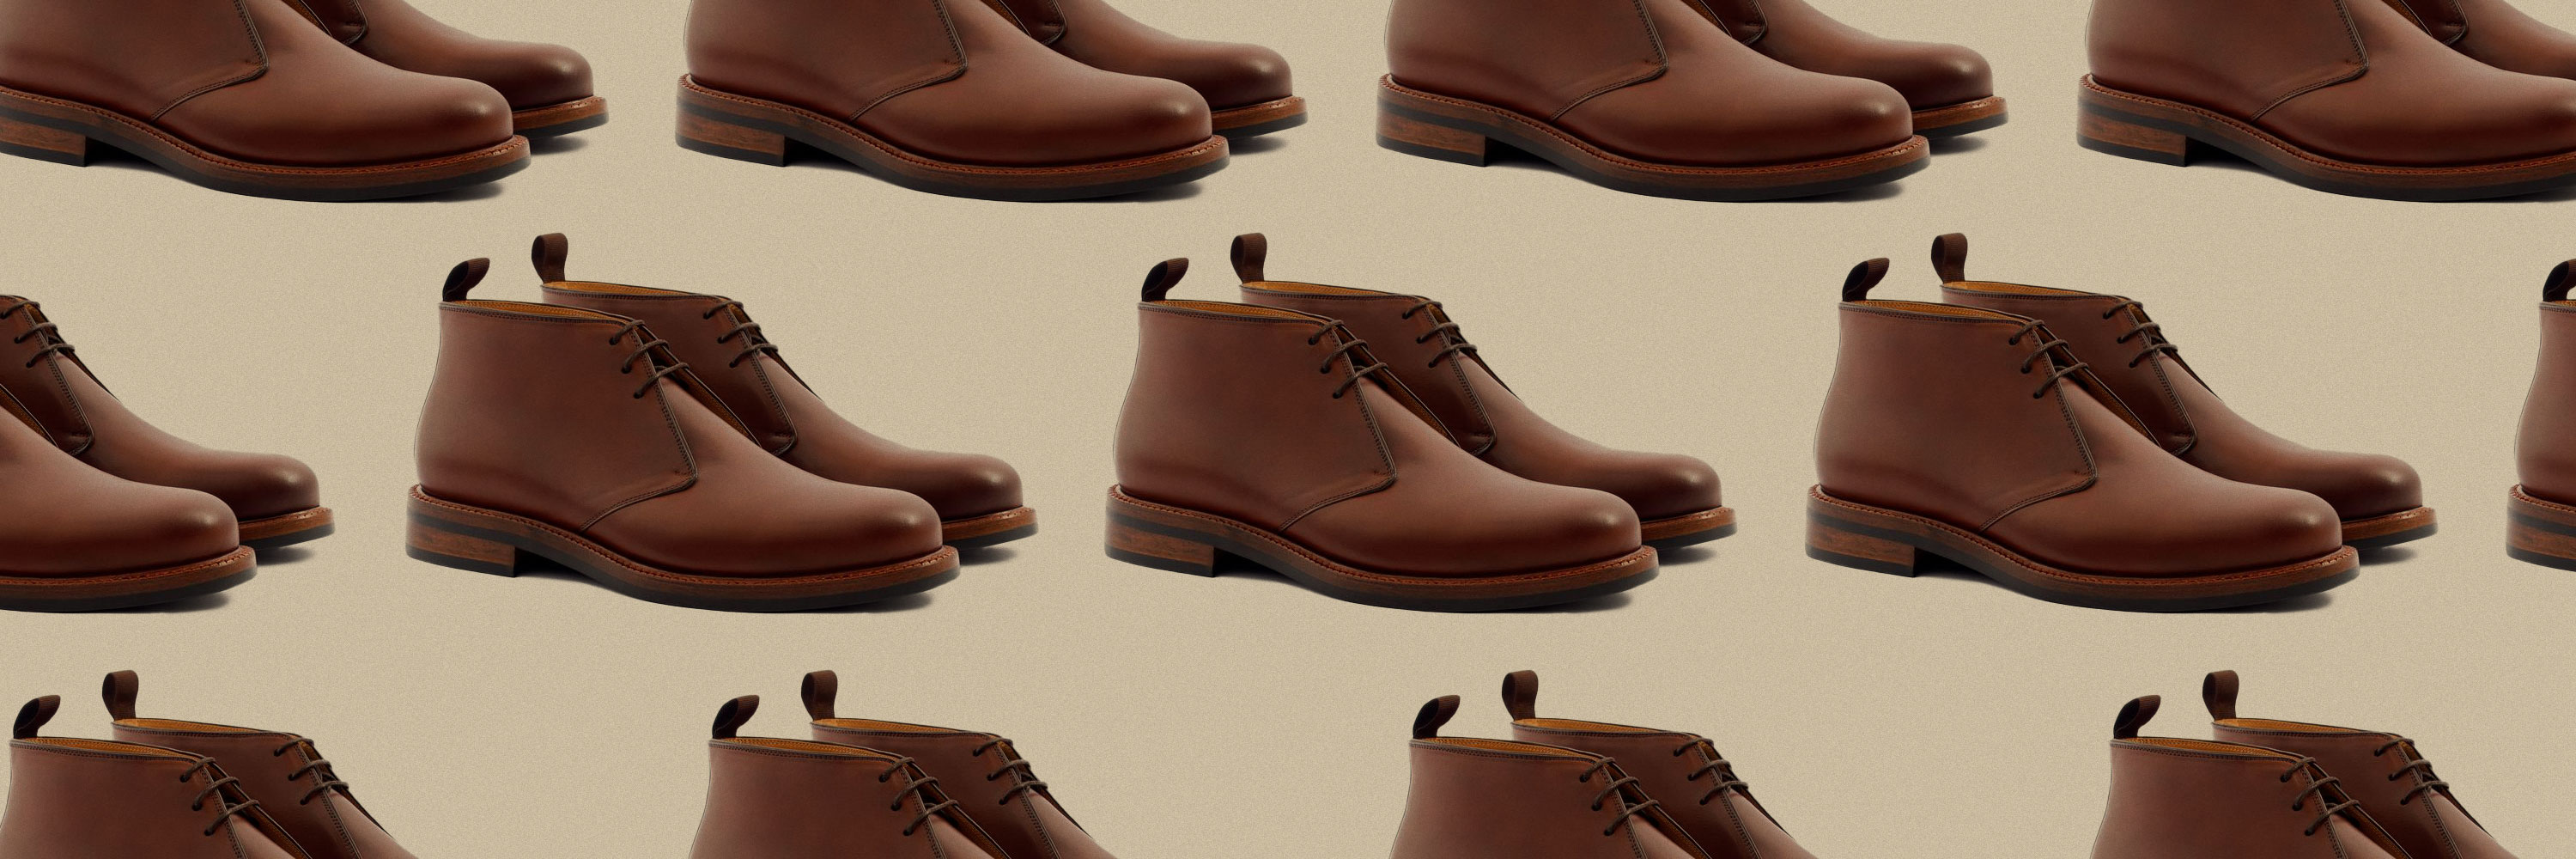 How To Wear Chukka Boots: 5 Different Outfits